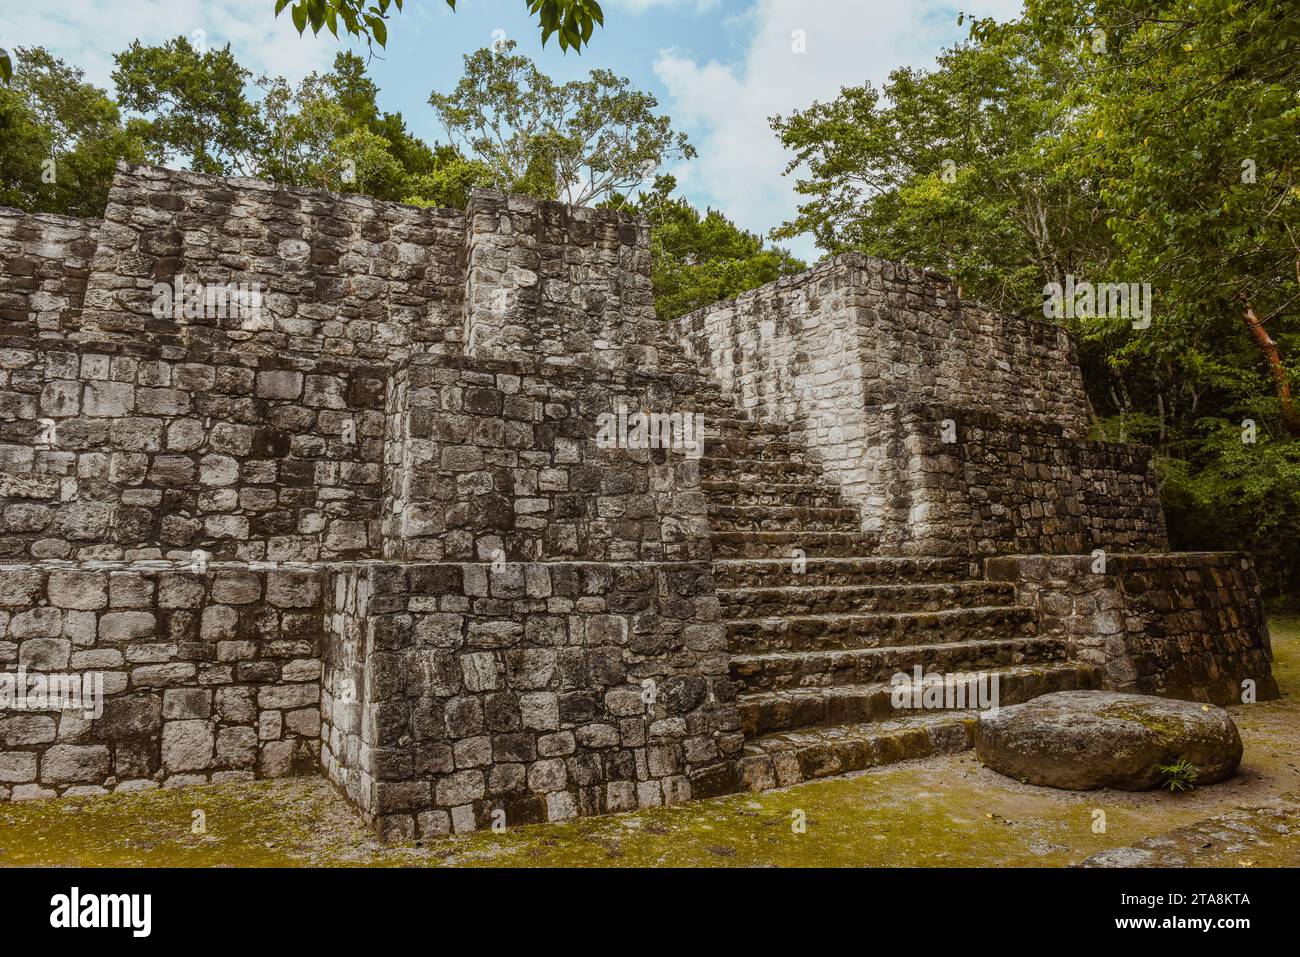 Maya archaeological site of Calakmul in the Calakmul Biosphere Reserve, Campeche state, Mexico Stock Photo